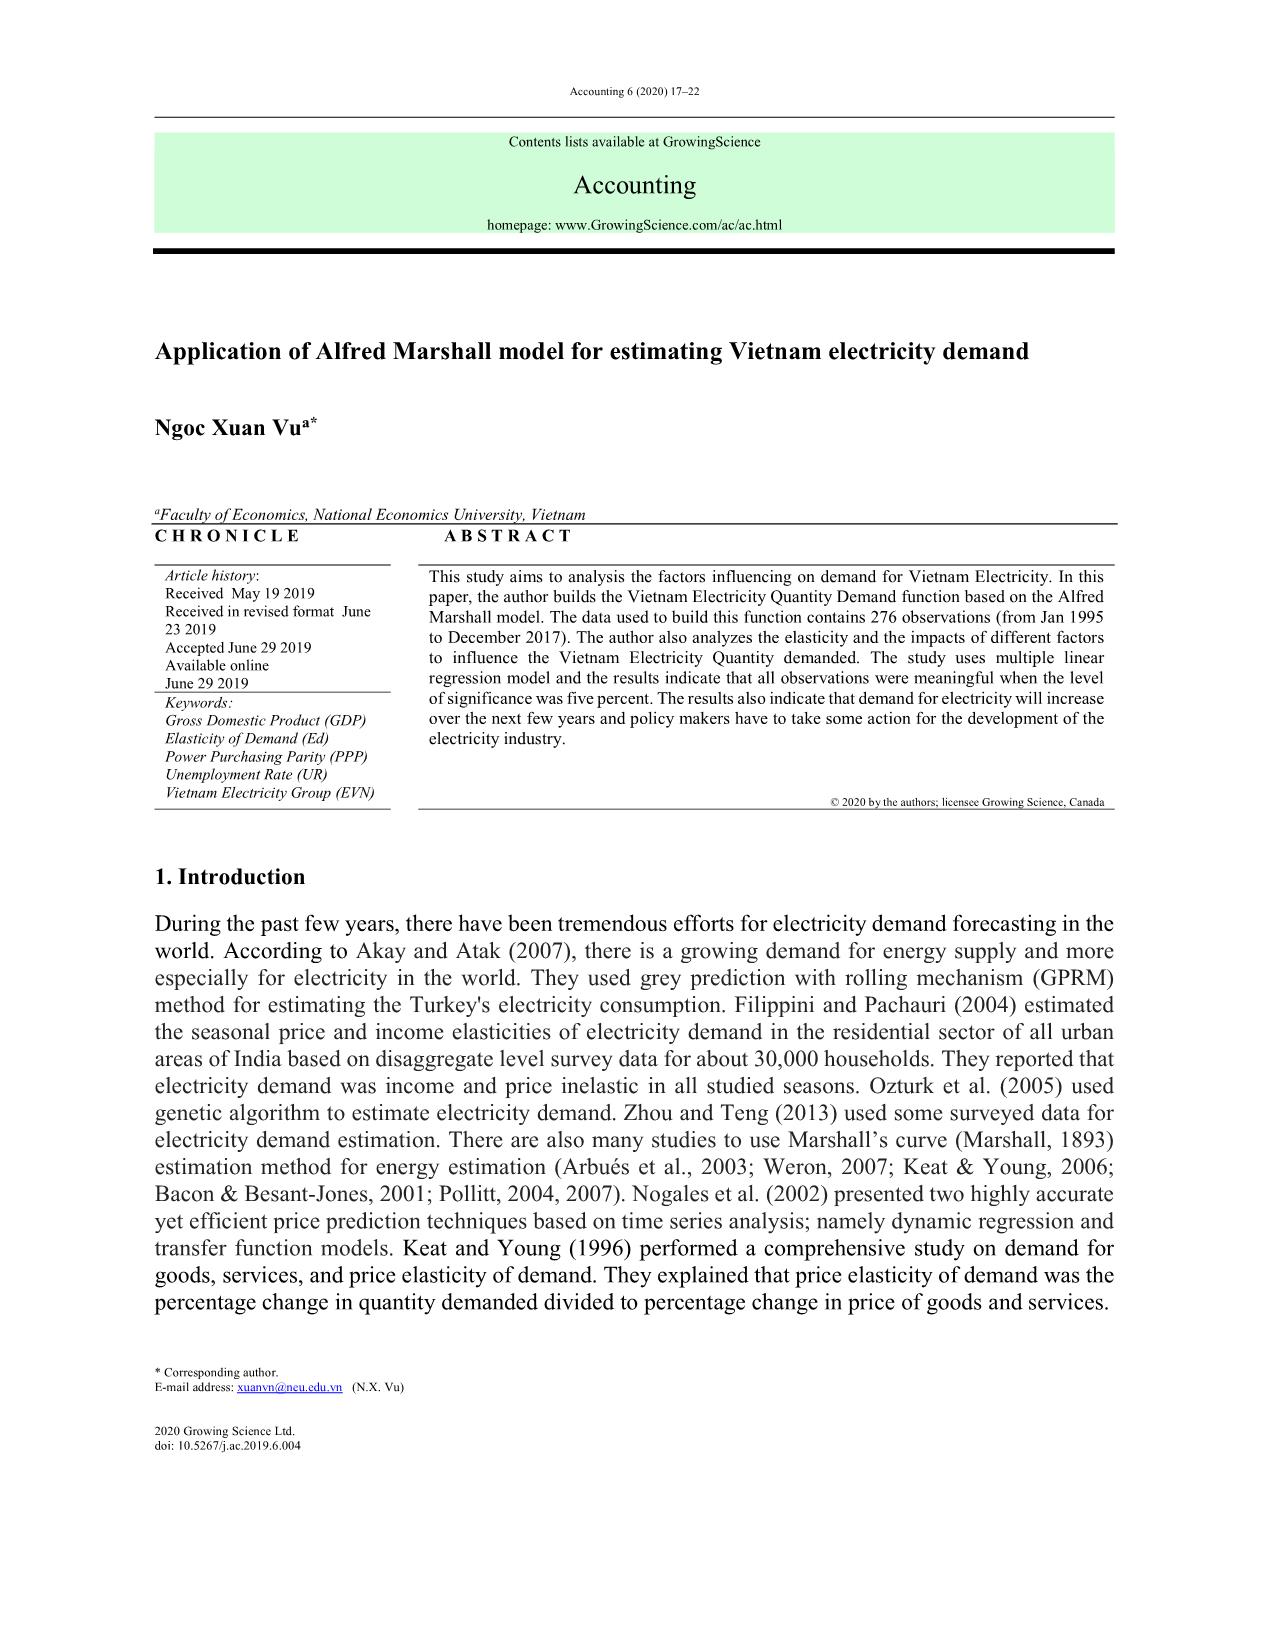 Application of Alfred Marshall model for estimating Vietnam electricity demand trang 1